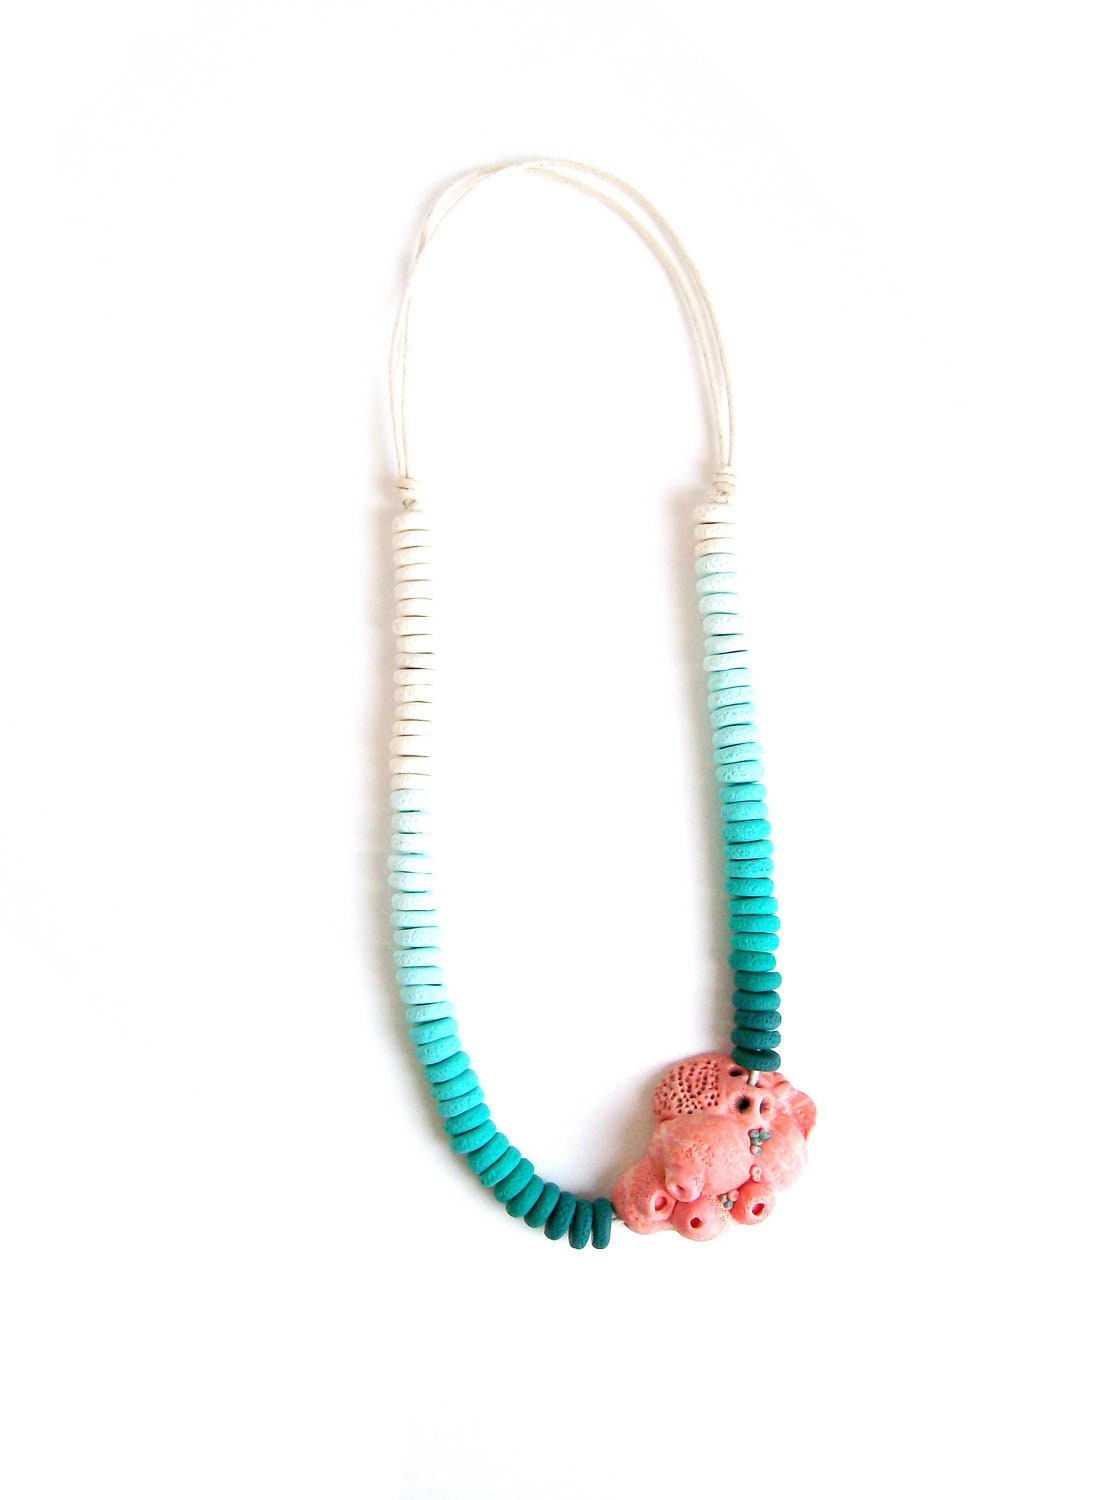 Long statement necklace asymmetrical barnacles coral turquoise white ombre polymer clay necklace Salmon sea creature ocean necklace ooak - HunkiiDorii